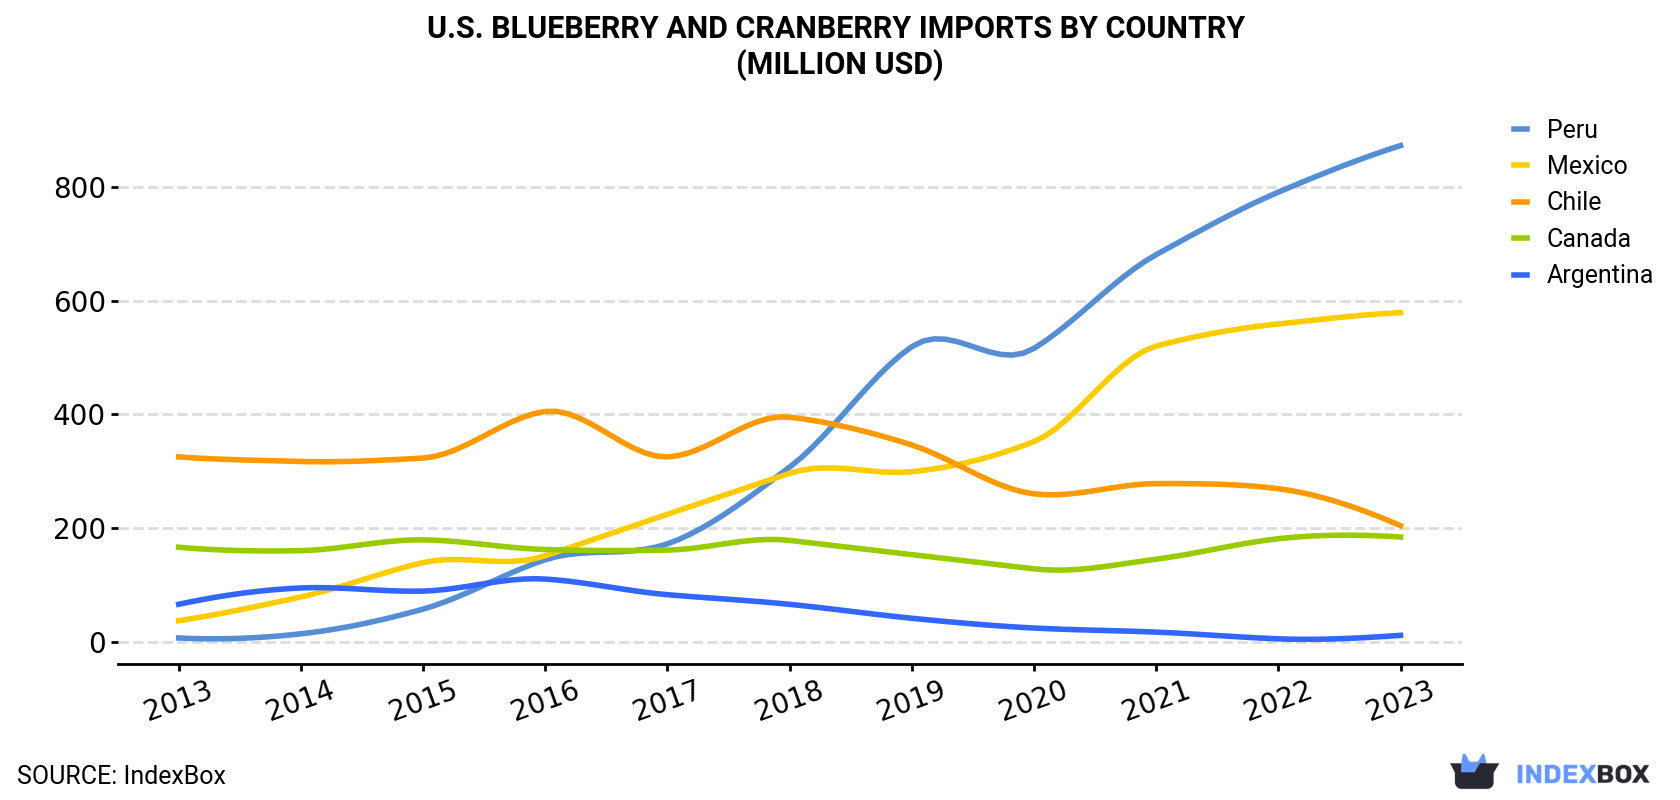 U.S. Blueberry And Cranberry Imports By Country (Million USD)